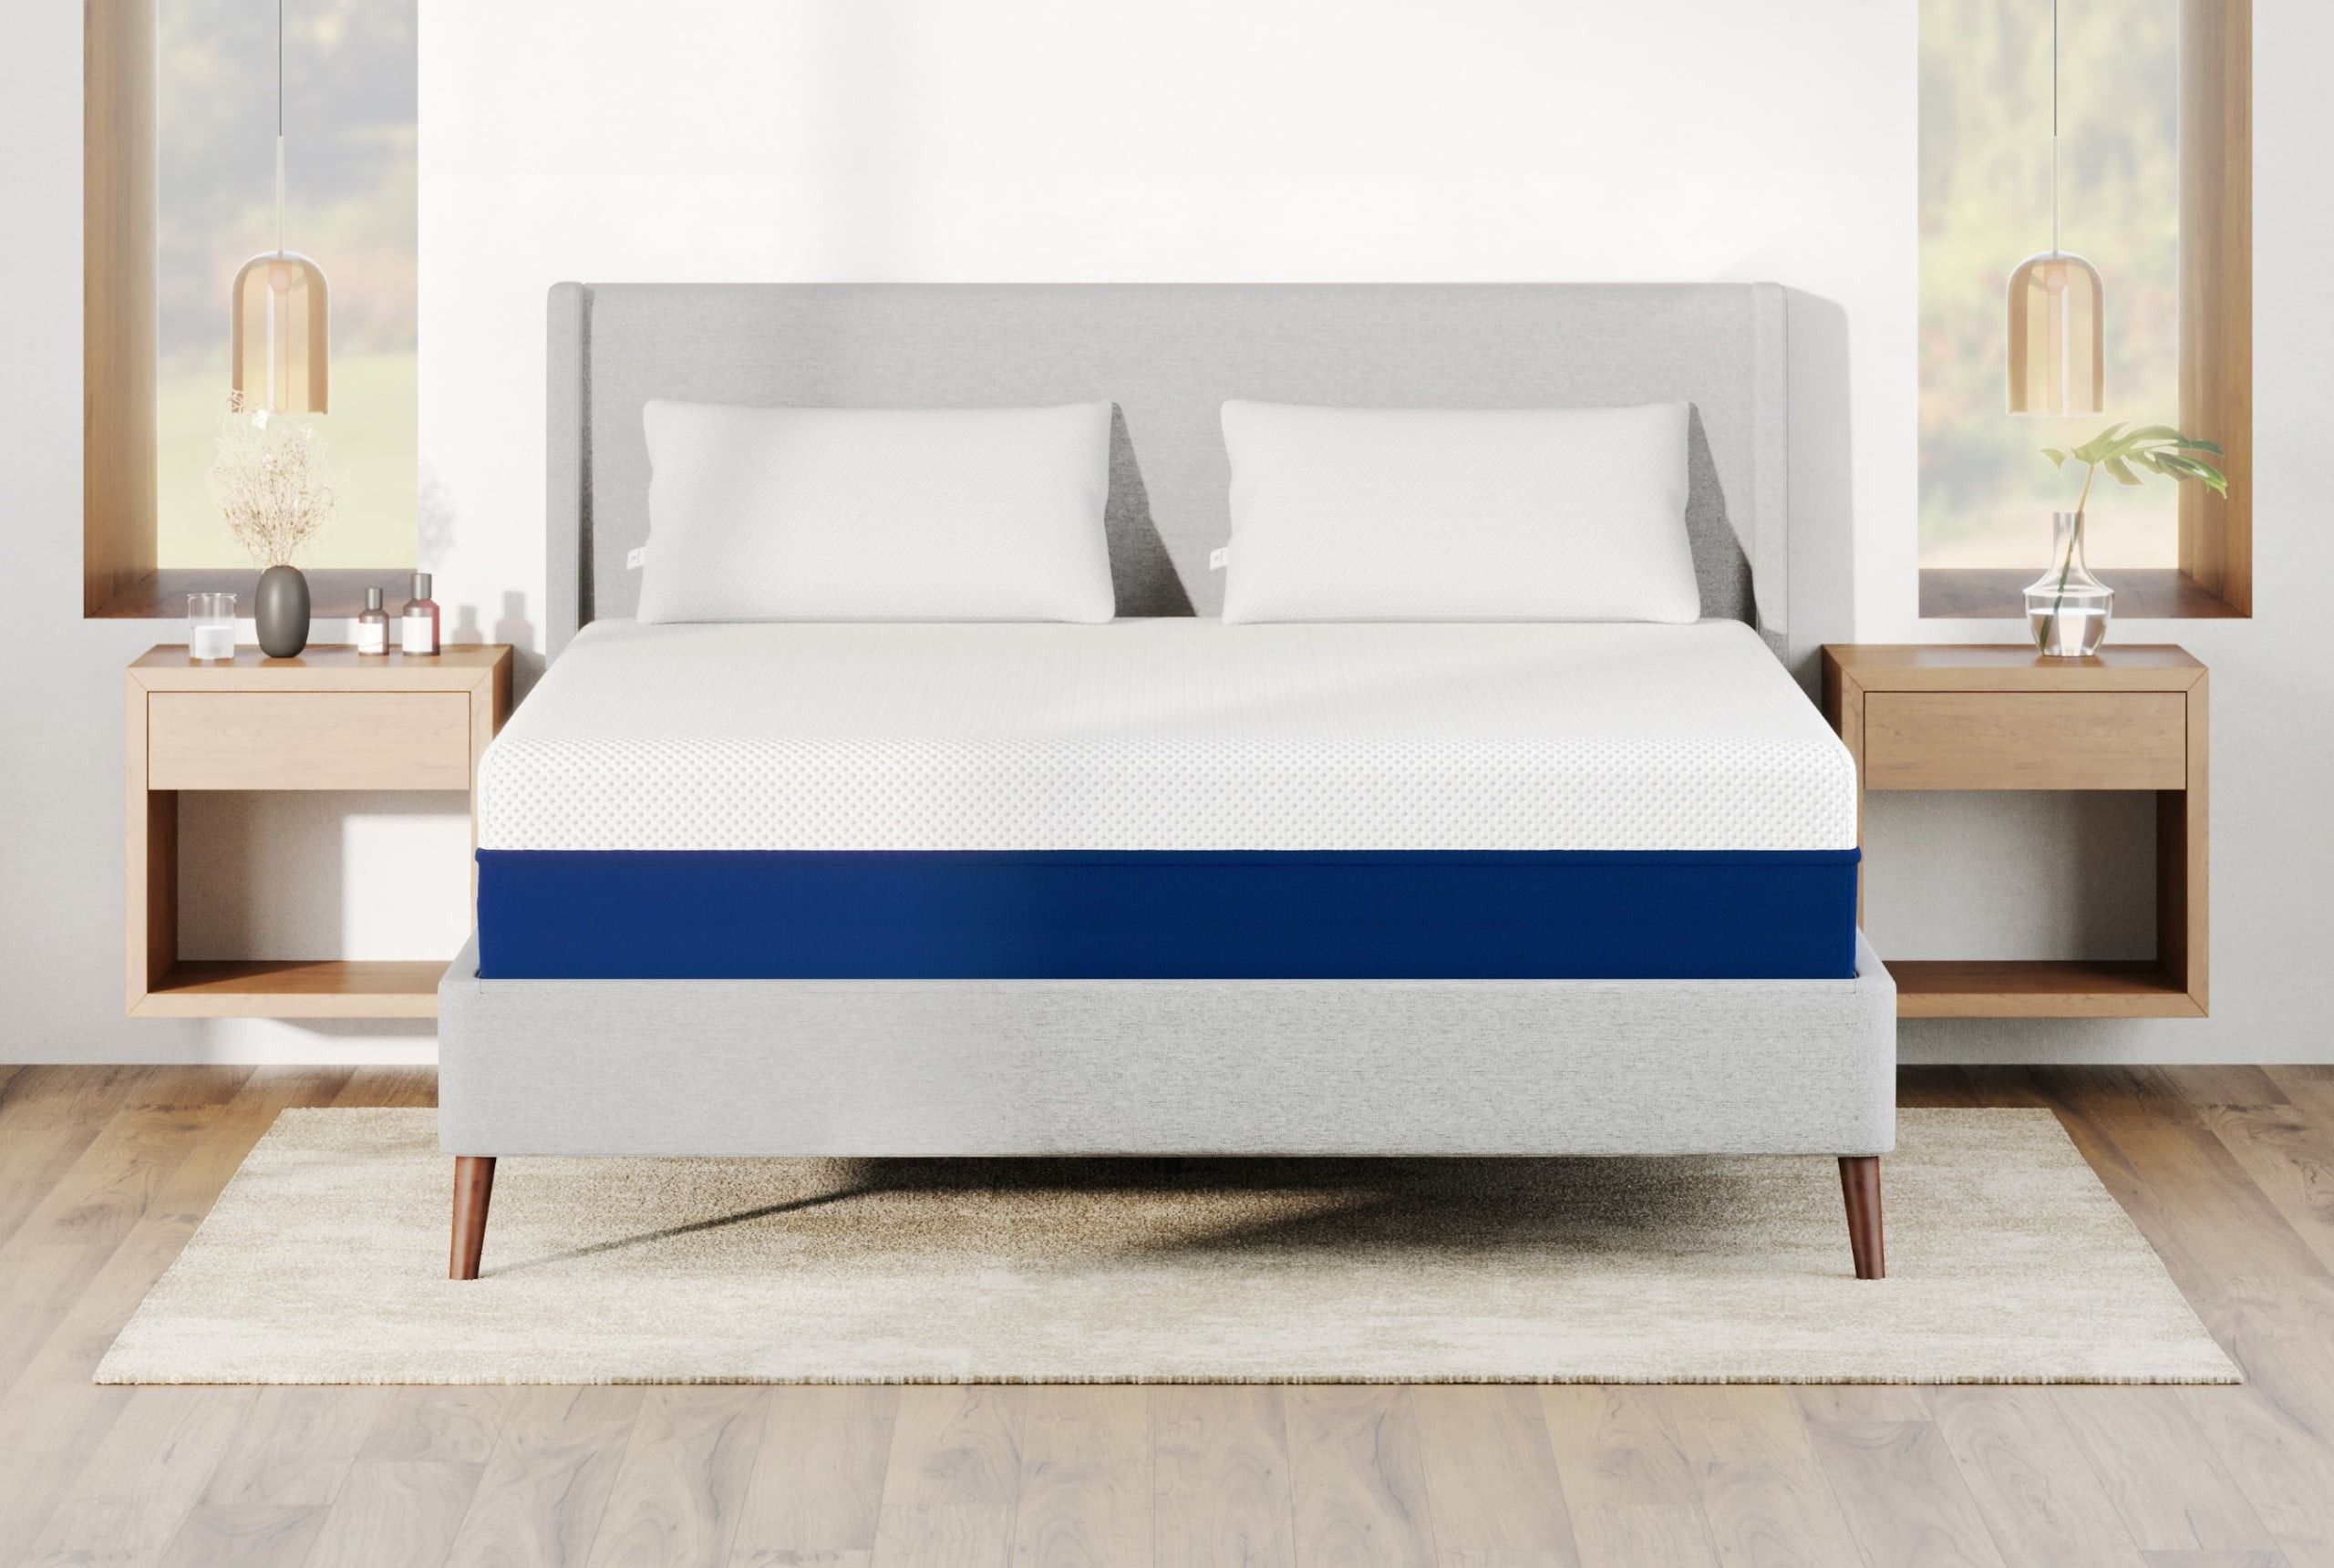 Save $ on any of our Award Winning Mattresses